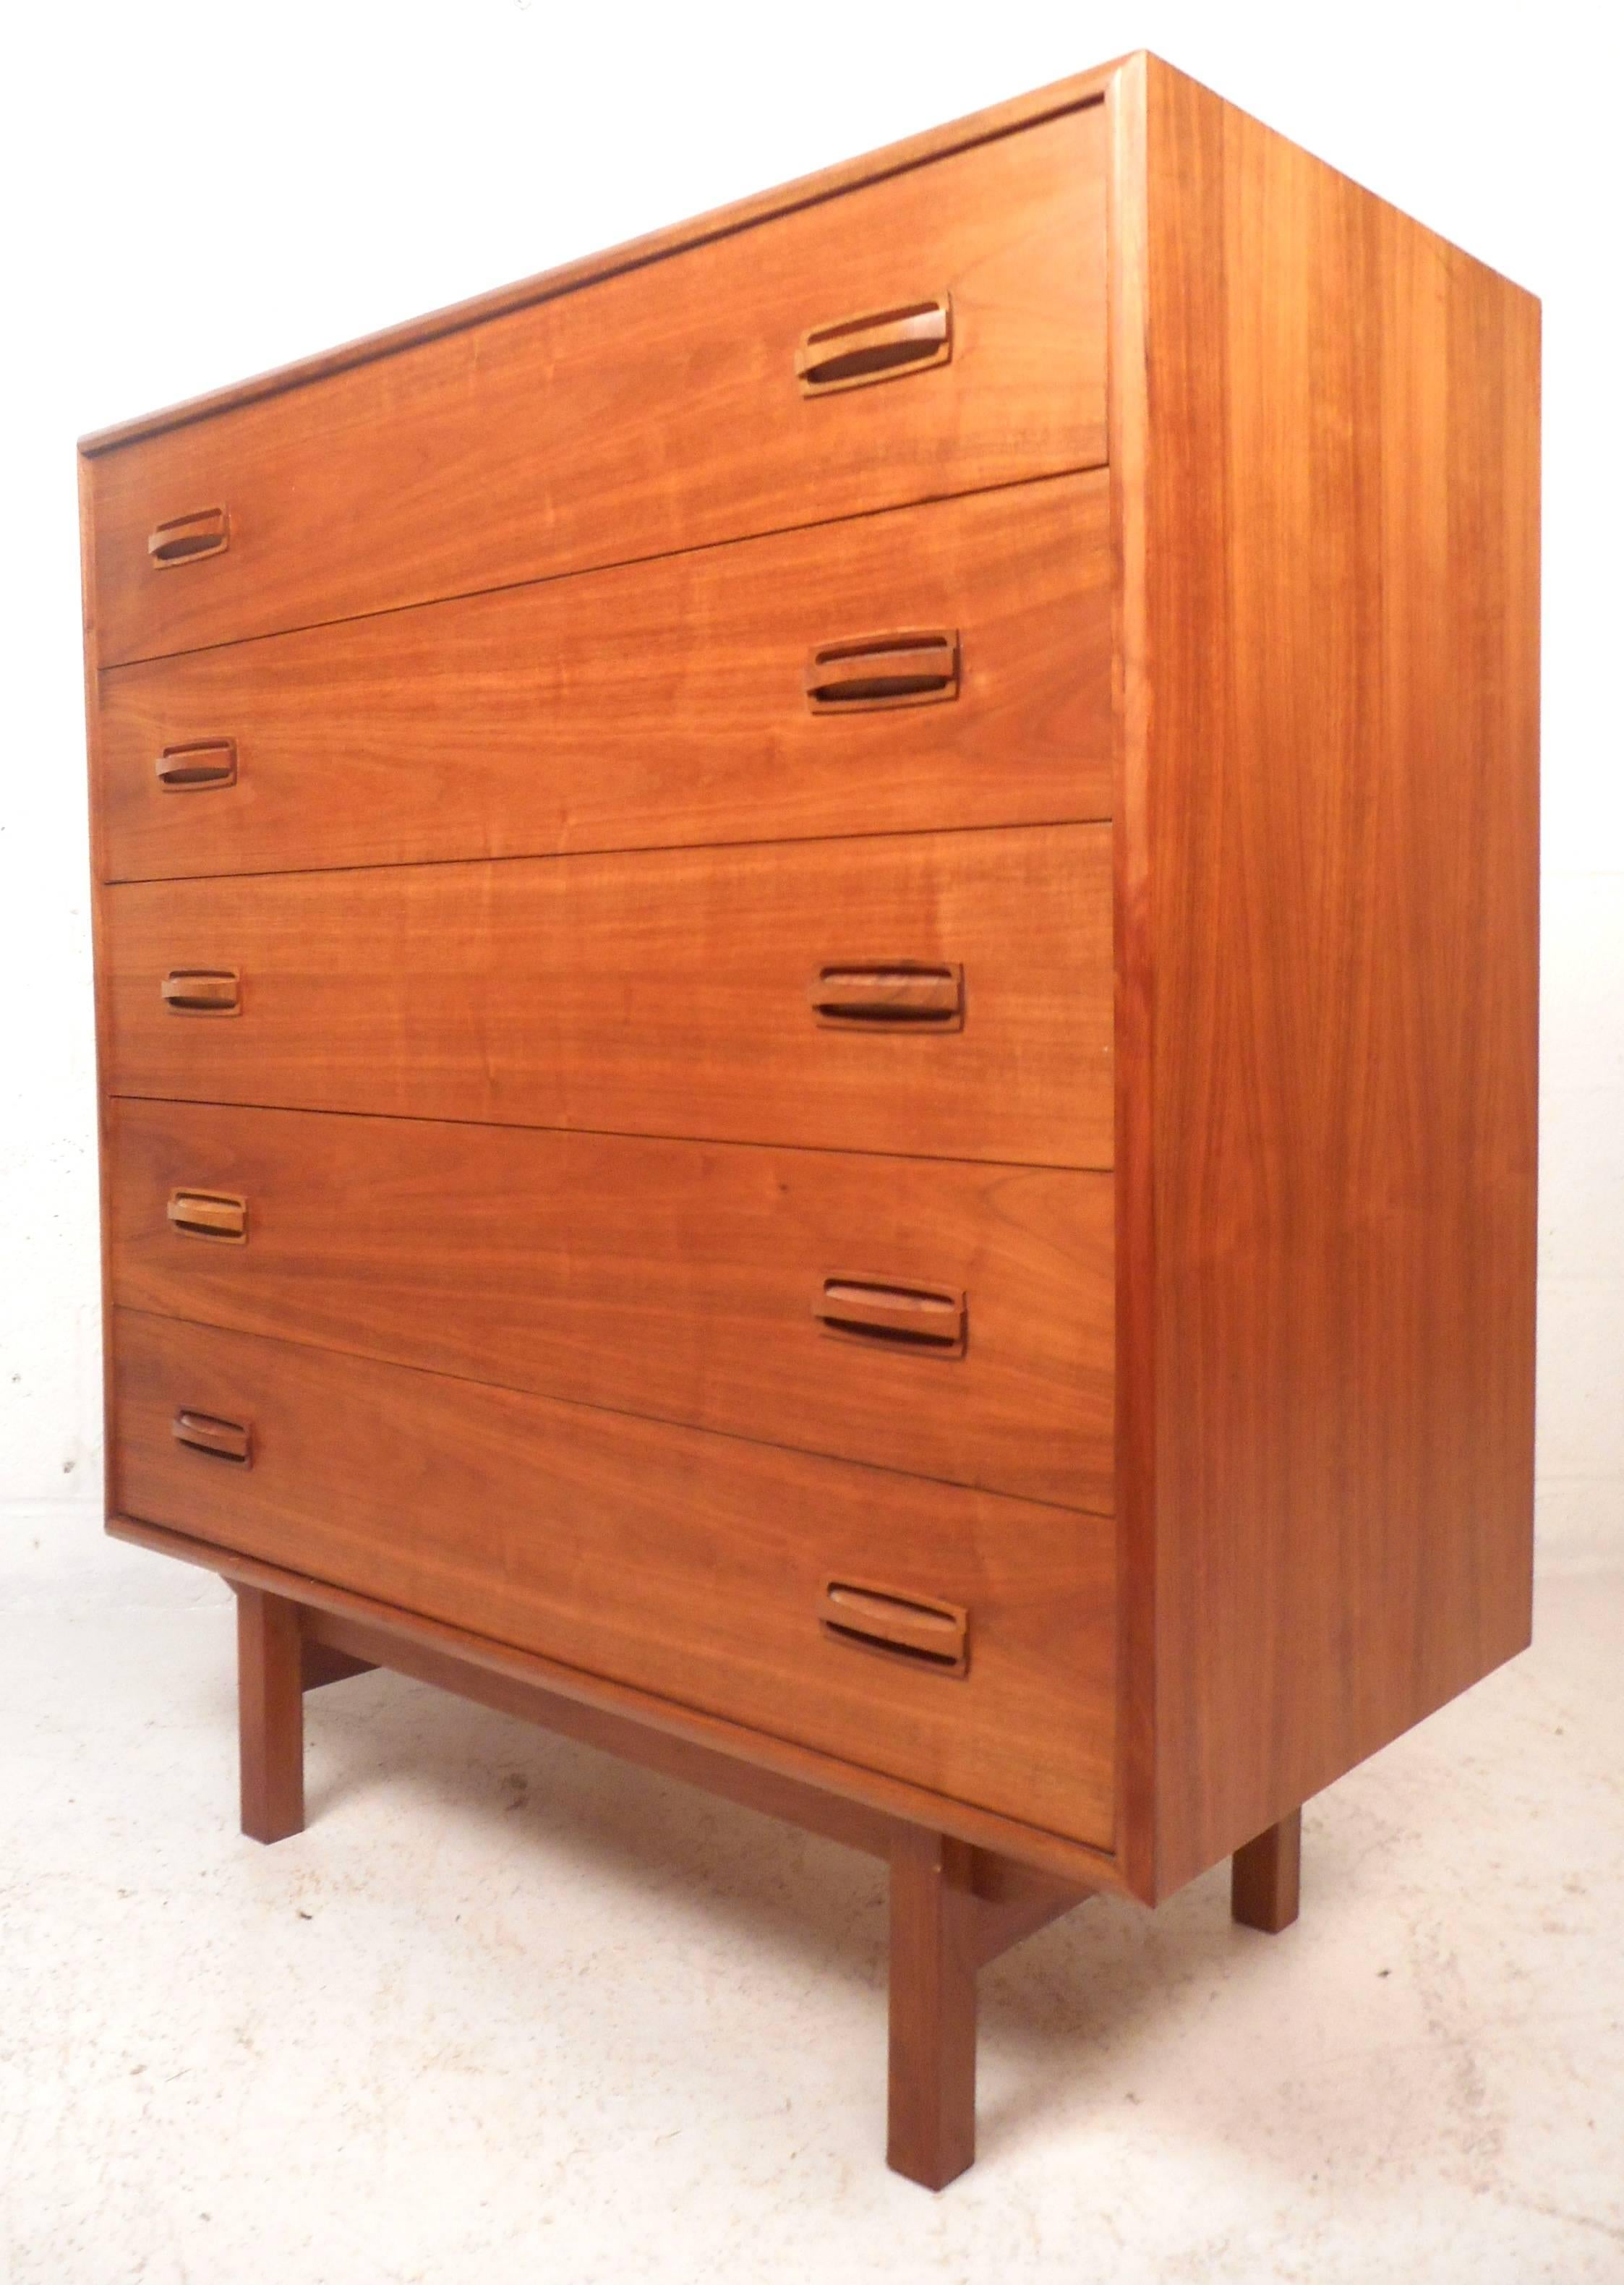 This impressive Mid-Century Modern bedroom set features a large dresser with nine hefty drawers and a highboy with five drawers. Rich vintage teak finish, wonderful sculpted drawer pulls, and clean lines showcase the quality of these elegant case